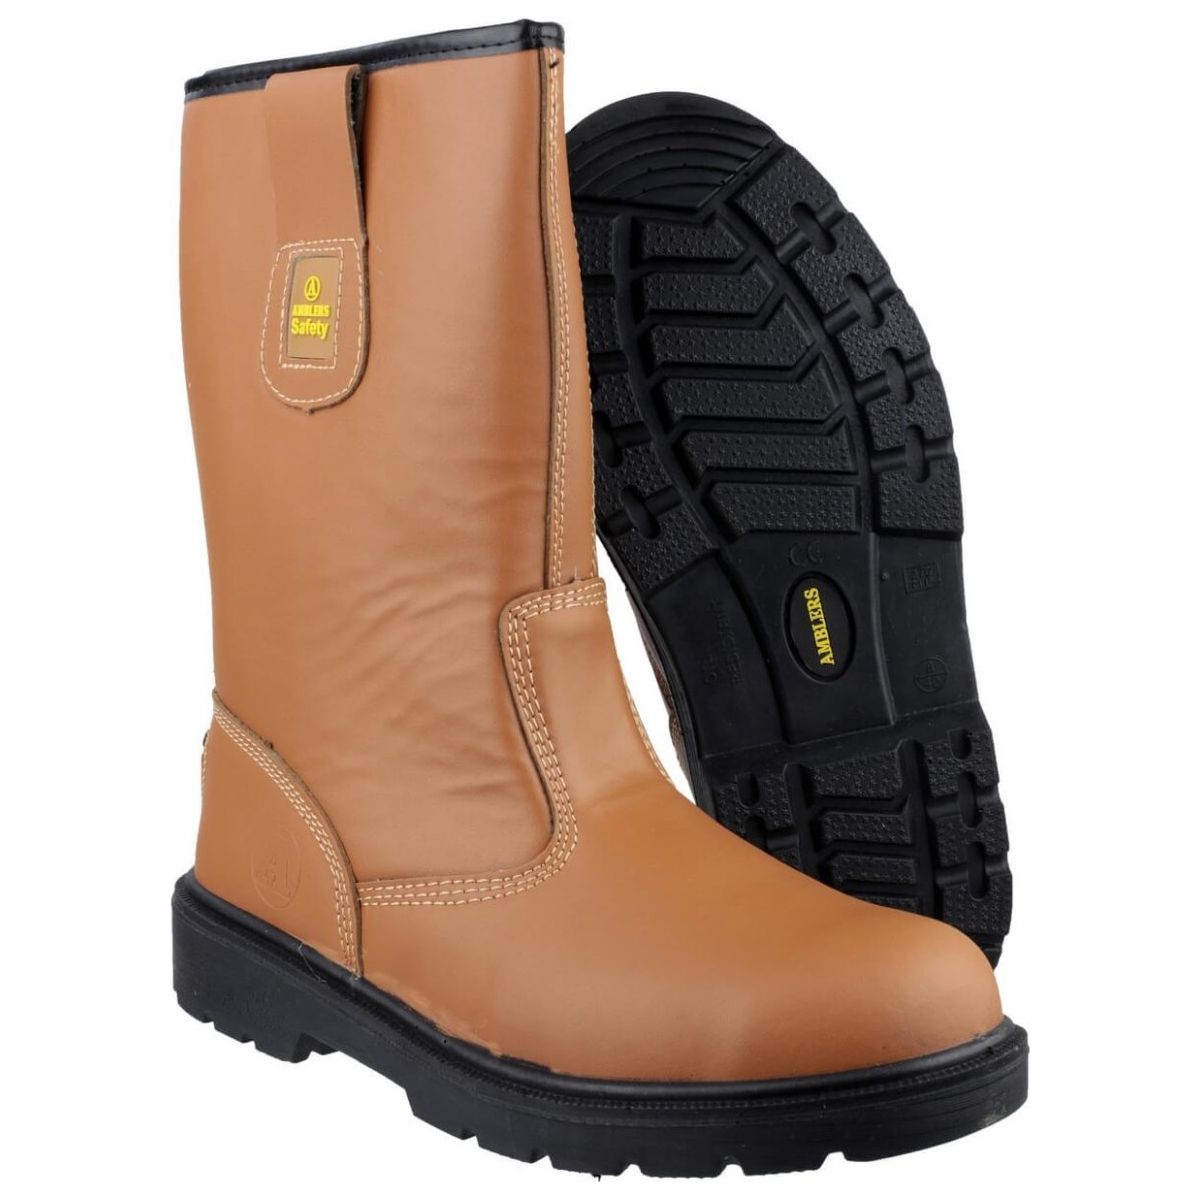 Amblers Fs124 Safety Rigger Boots Mens - workweargurus.com